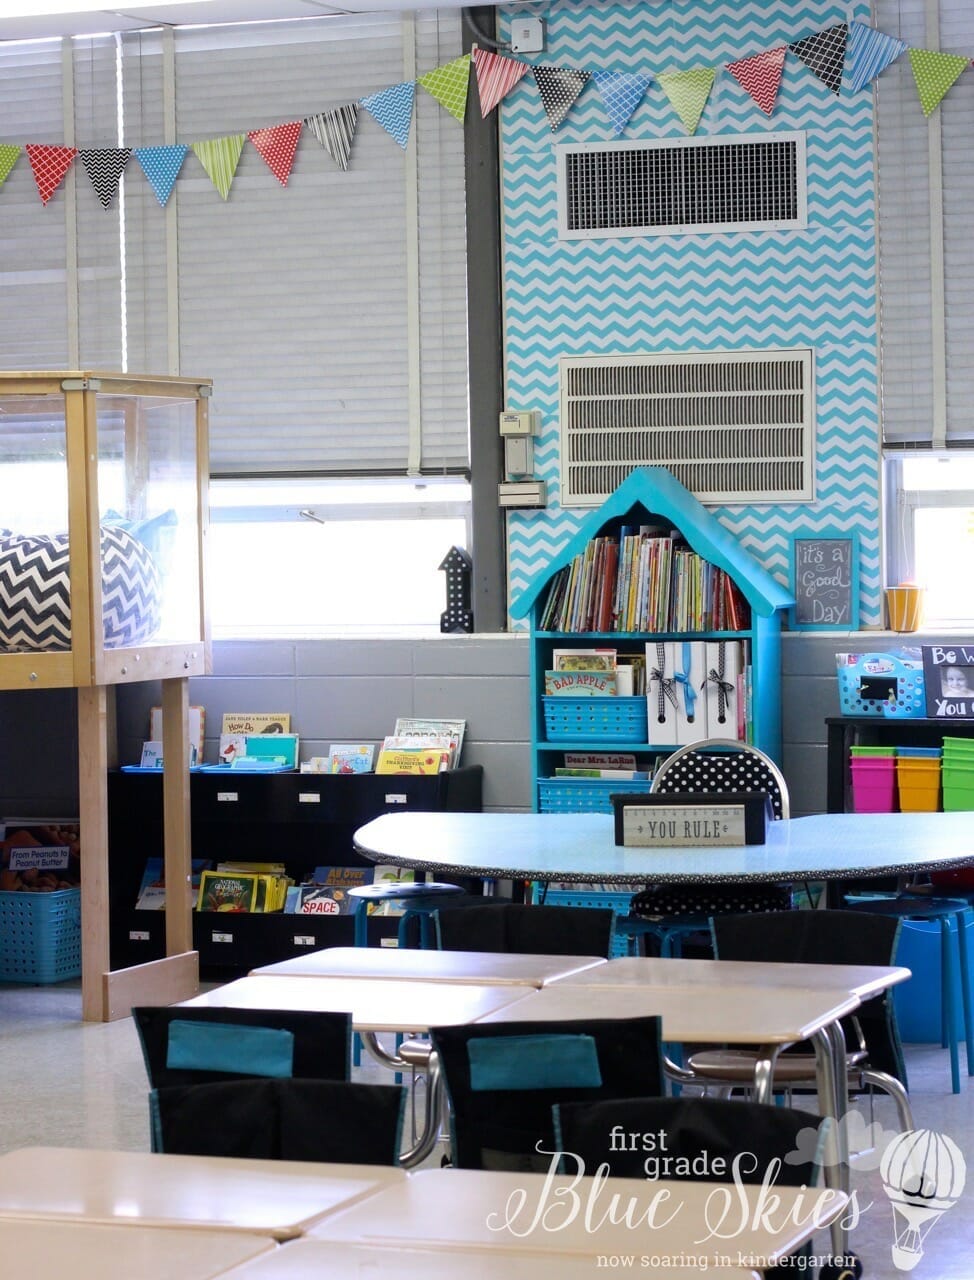 Classroom Reveal 2015 First Grade Blue Skies Banner on Windows and chevron contact paper on table